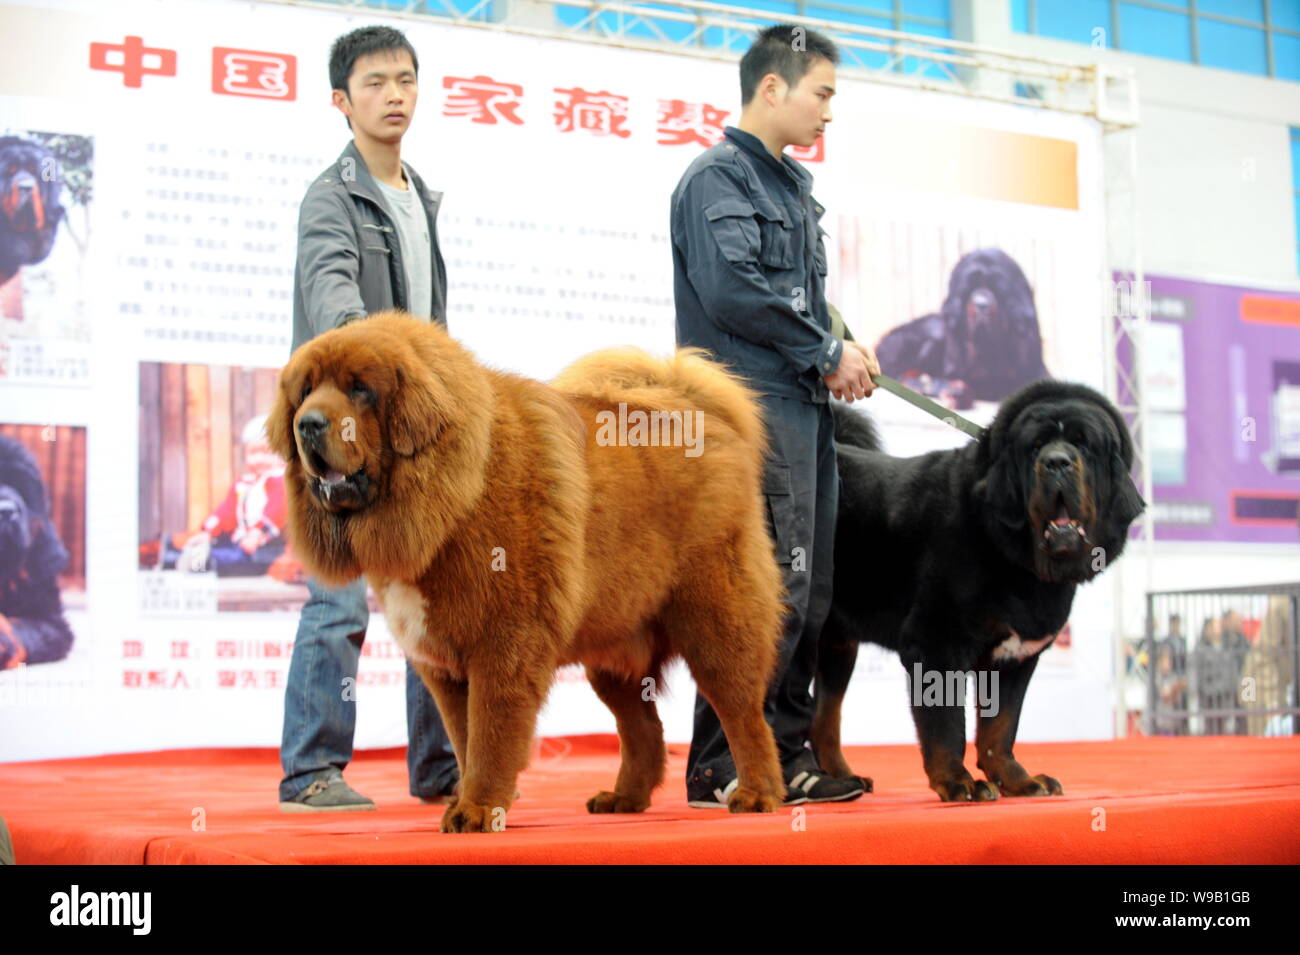 --FILE--Chinese men show purebred Tibetan mastiffs during a mastiff exhibition in Chongqing, China, 6 March 2010.   Chinas latest must-have luxury for Stock Photo